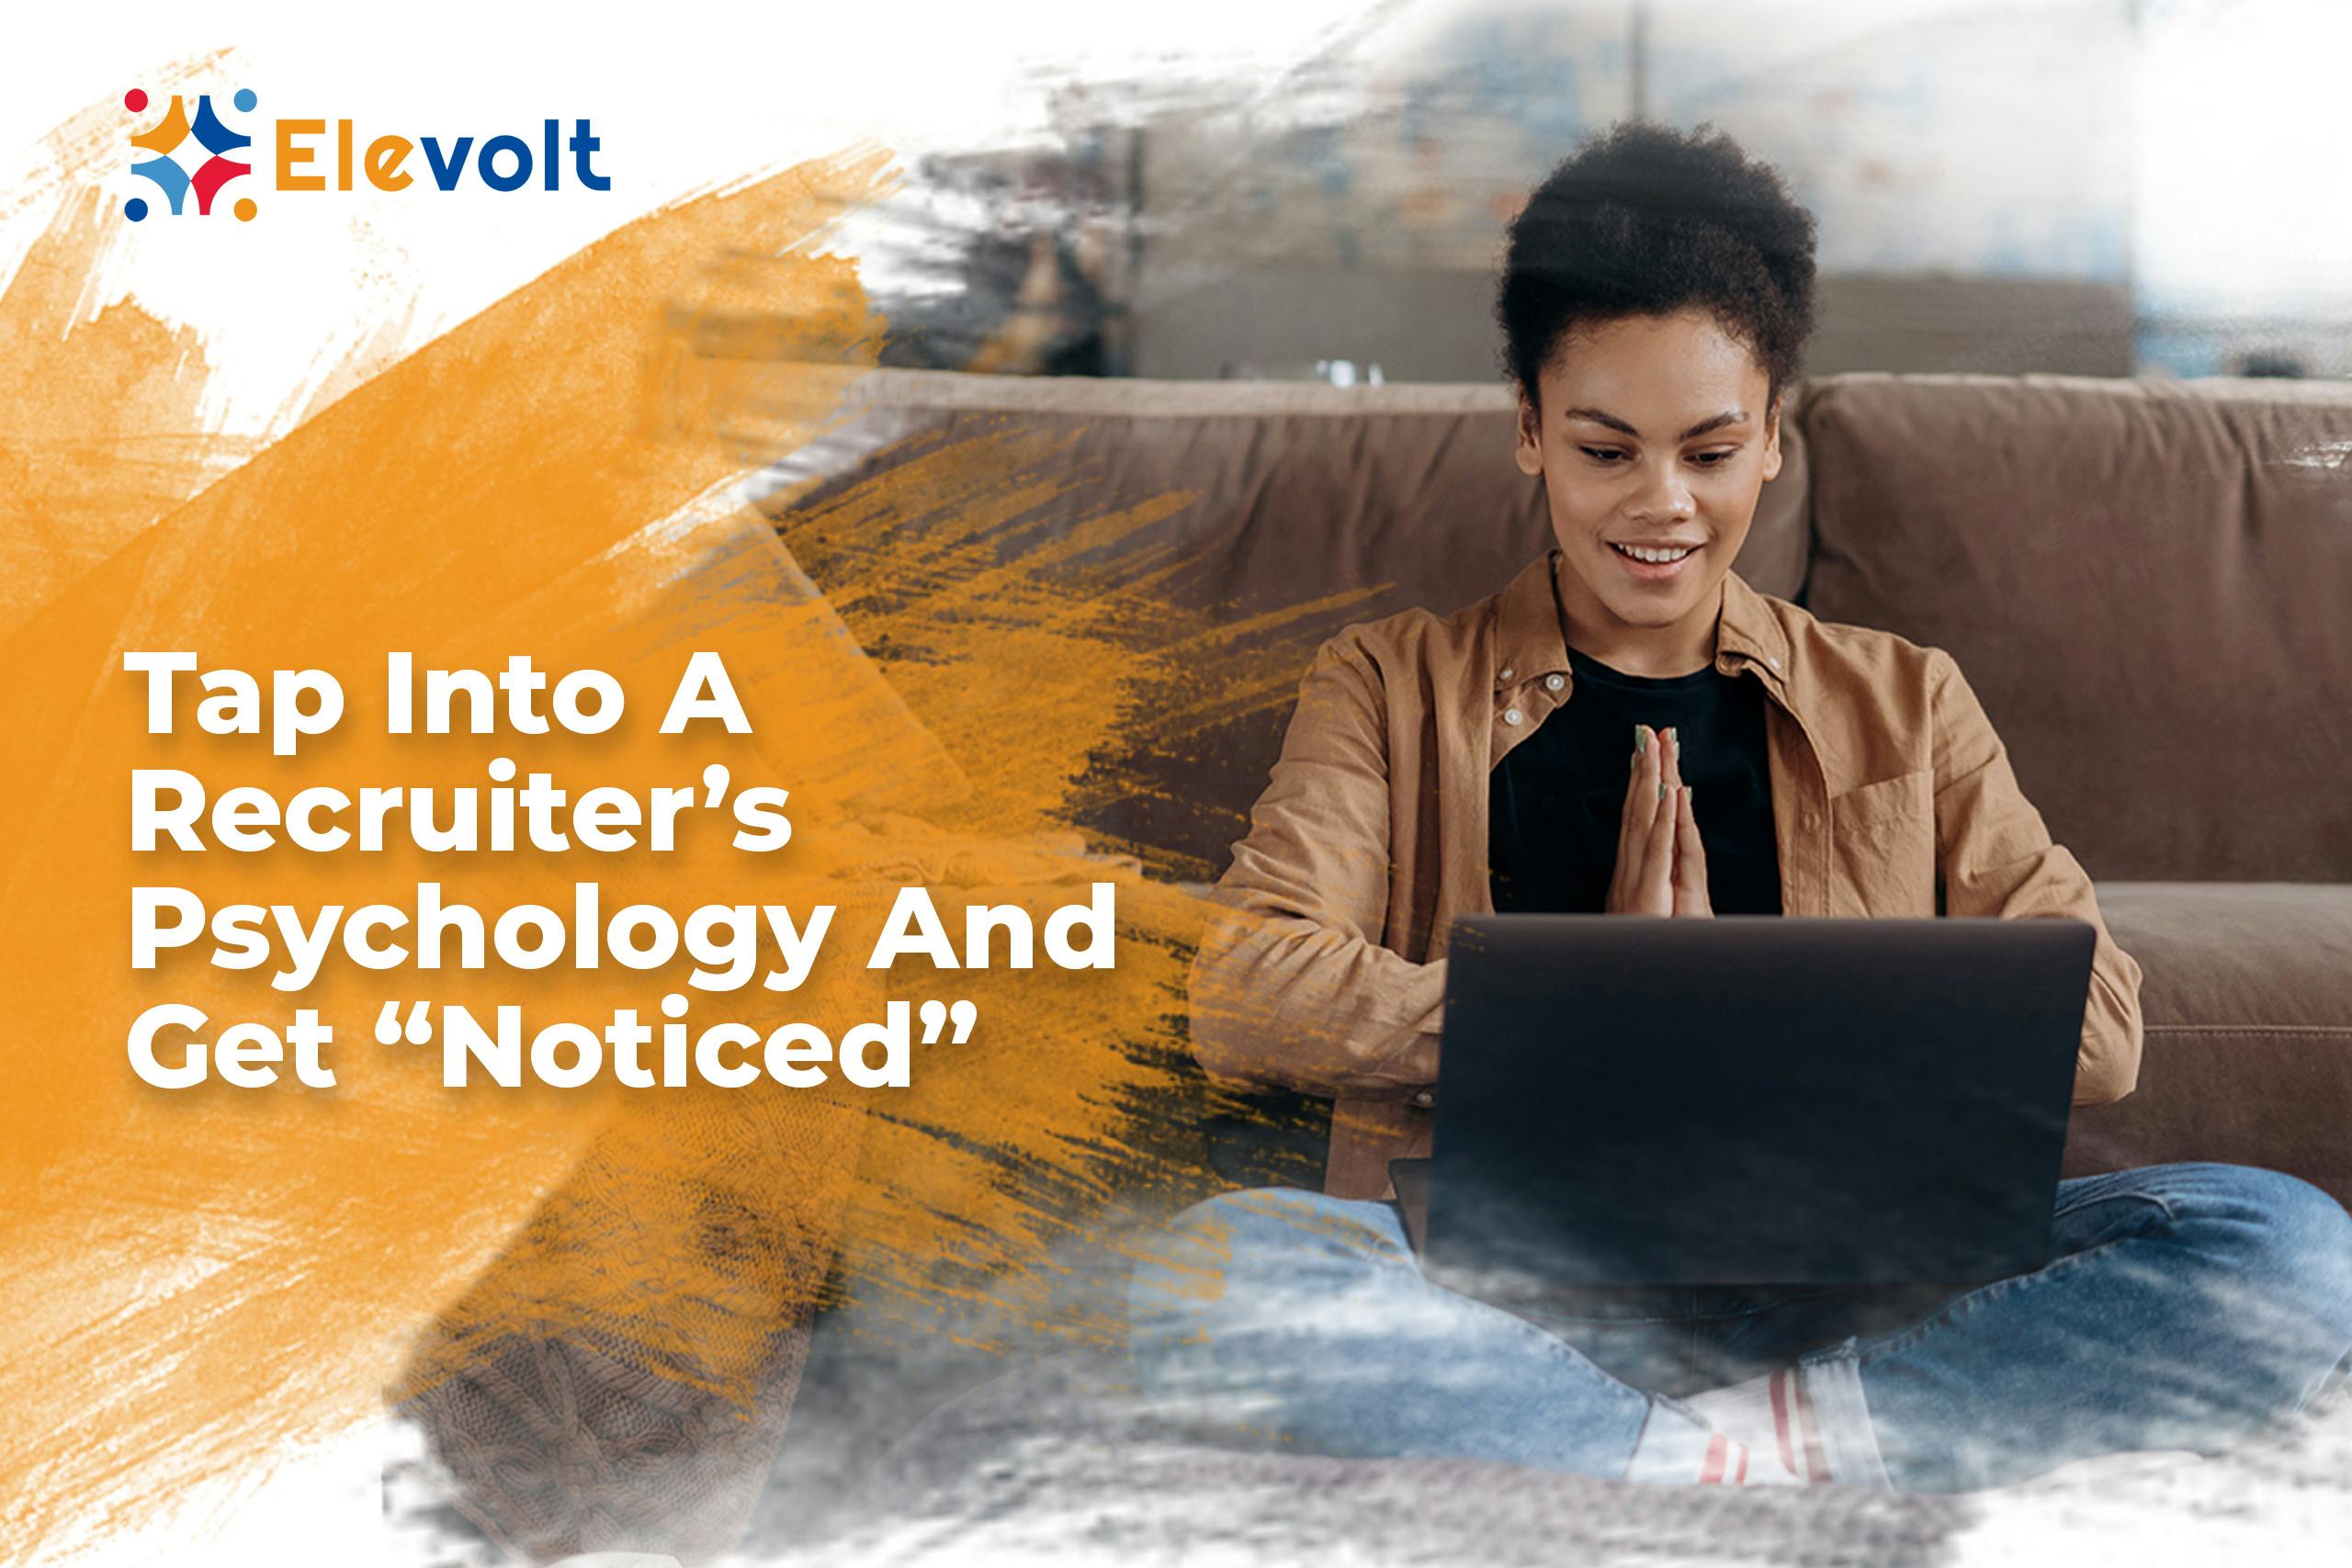 Tap Into A Recruiter’s Psychology And Get “Noticed” : Elevolt Blog